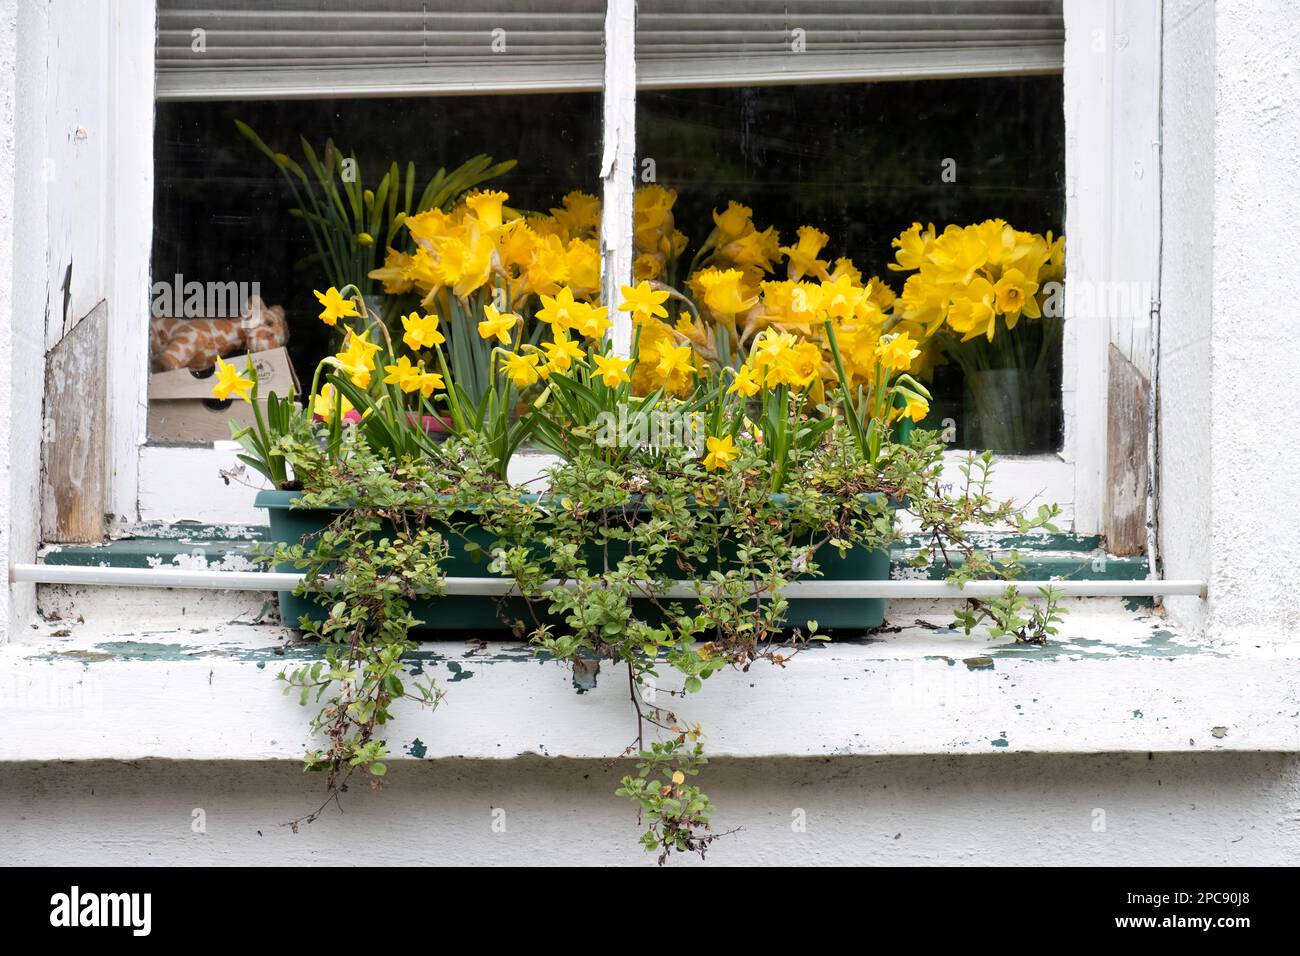 A window box on a house window ledge in Devon, UK. The box is filled with a spring display of daffodils (Narcissus) in full bloom with more inside Stock Photo